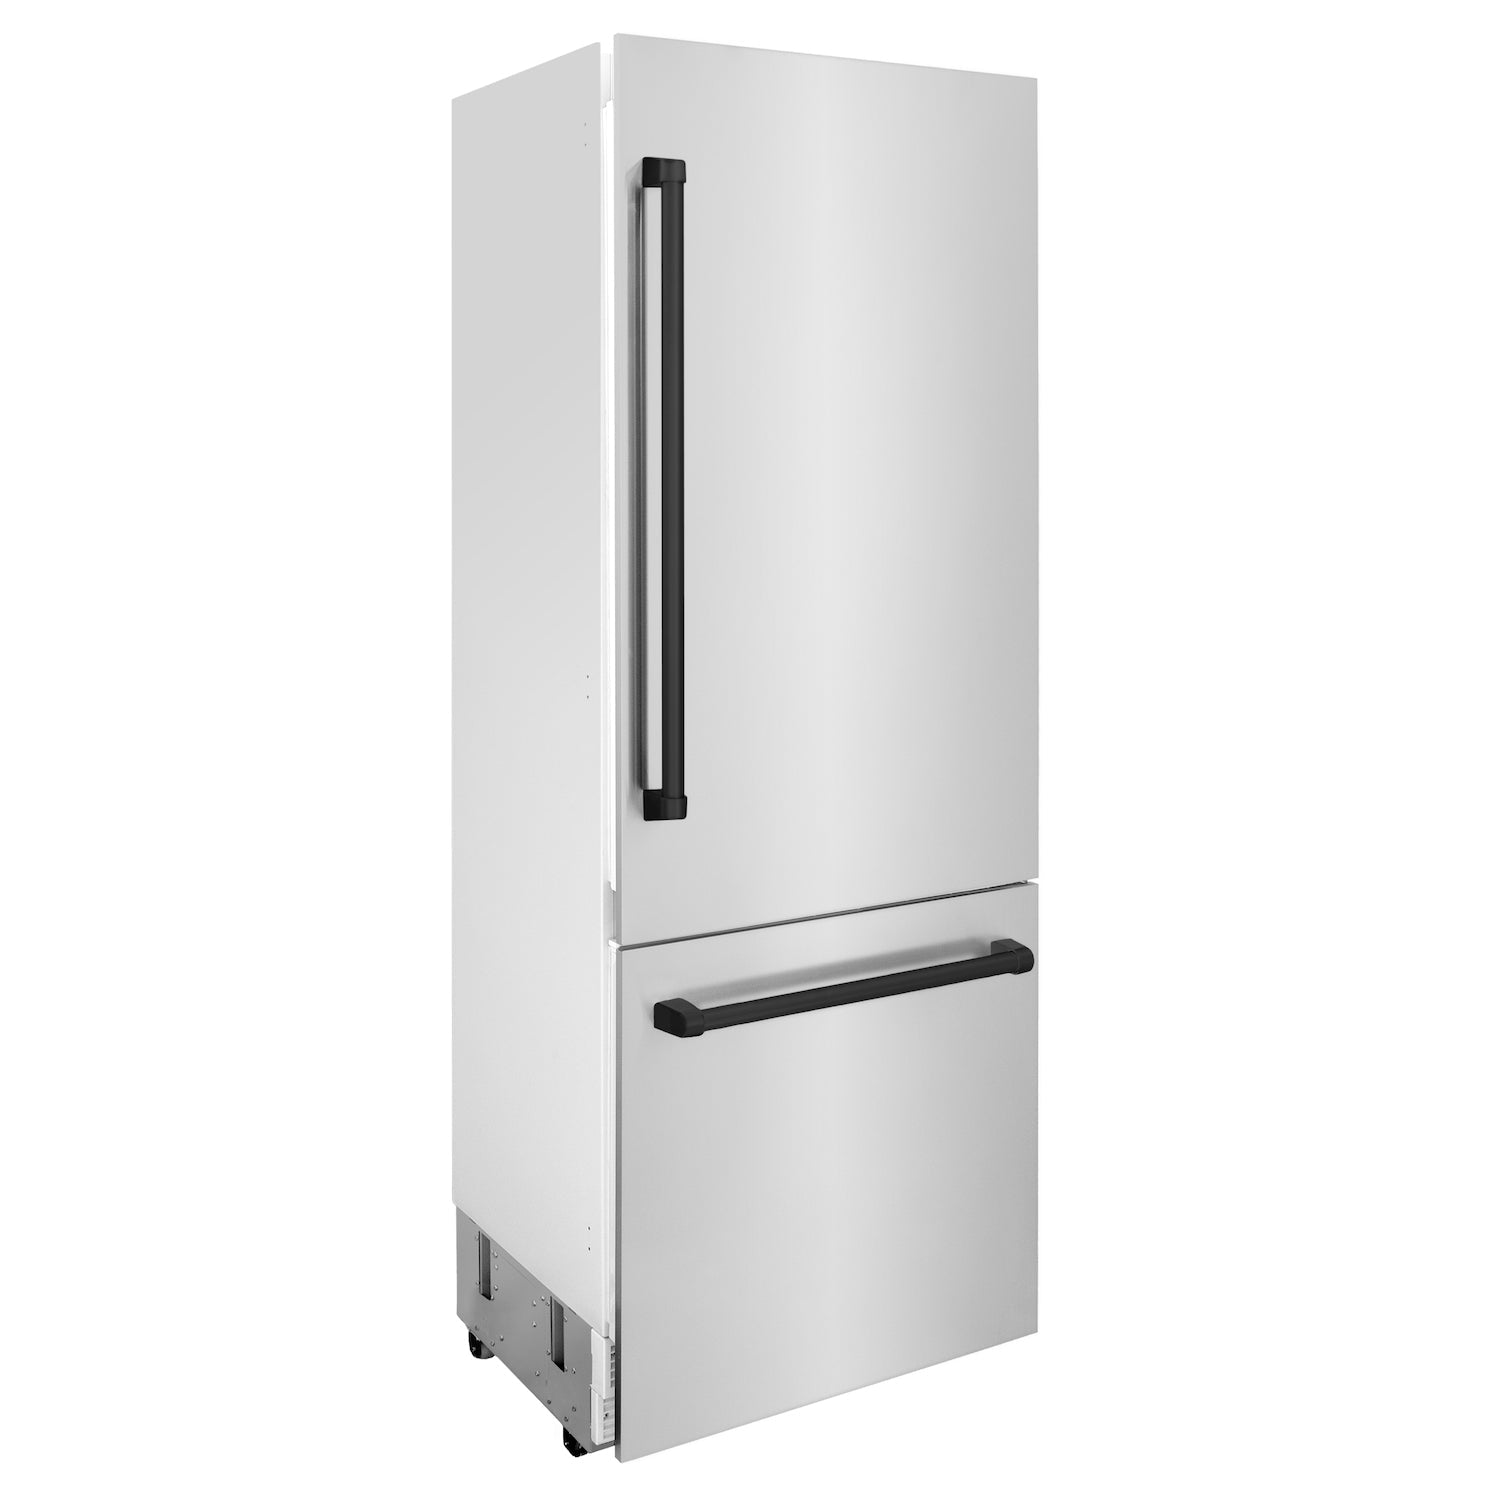 ZLINE 30" Autograph Edition Built-in 2-Door Bottom Freezer Refrigerator - Stainless Steel with Accents, Internal Water and Ice Dispenser